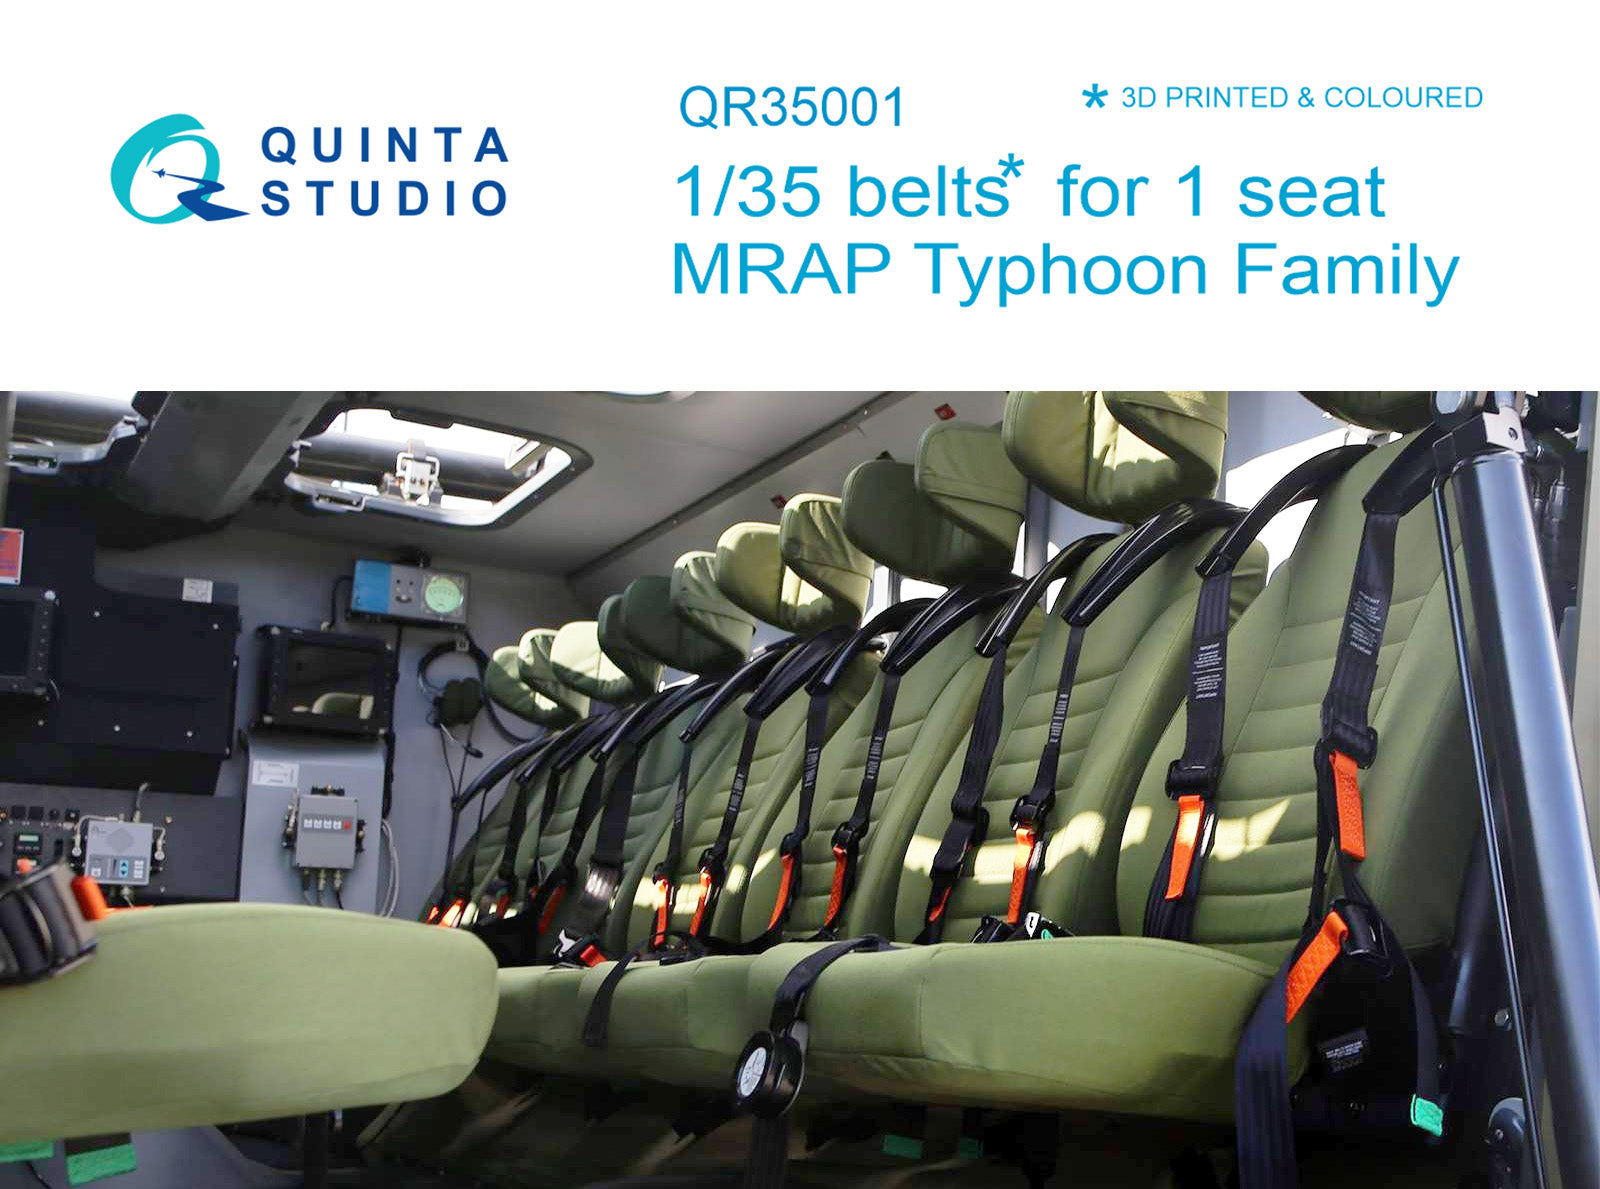 Quinta Studio - 1/35 MRAP Typhoon Family belts for 1 seat QR35001 for all kits